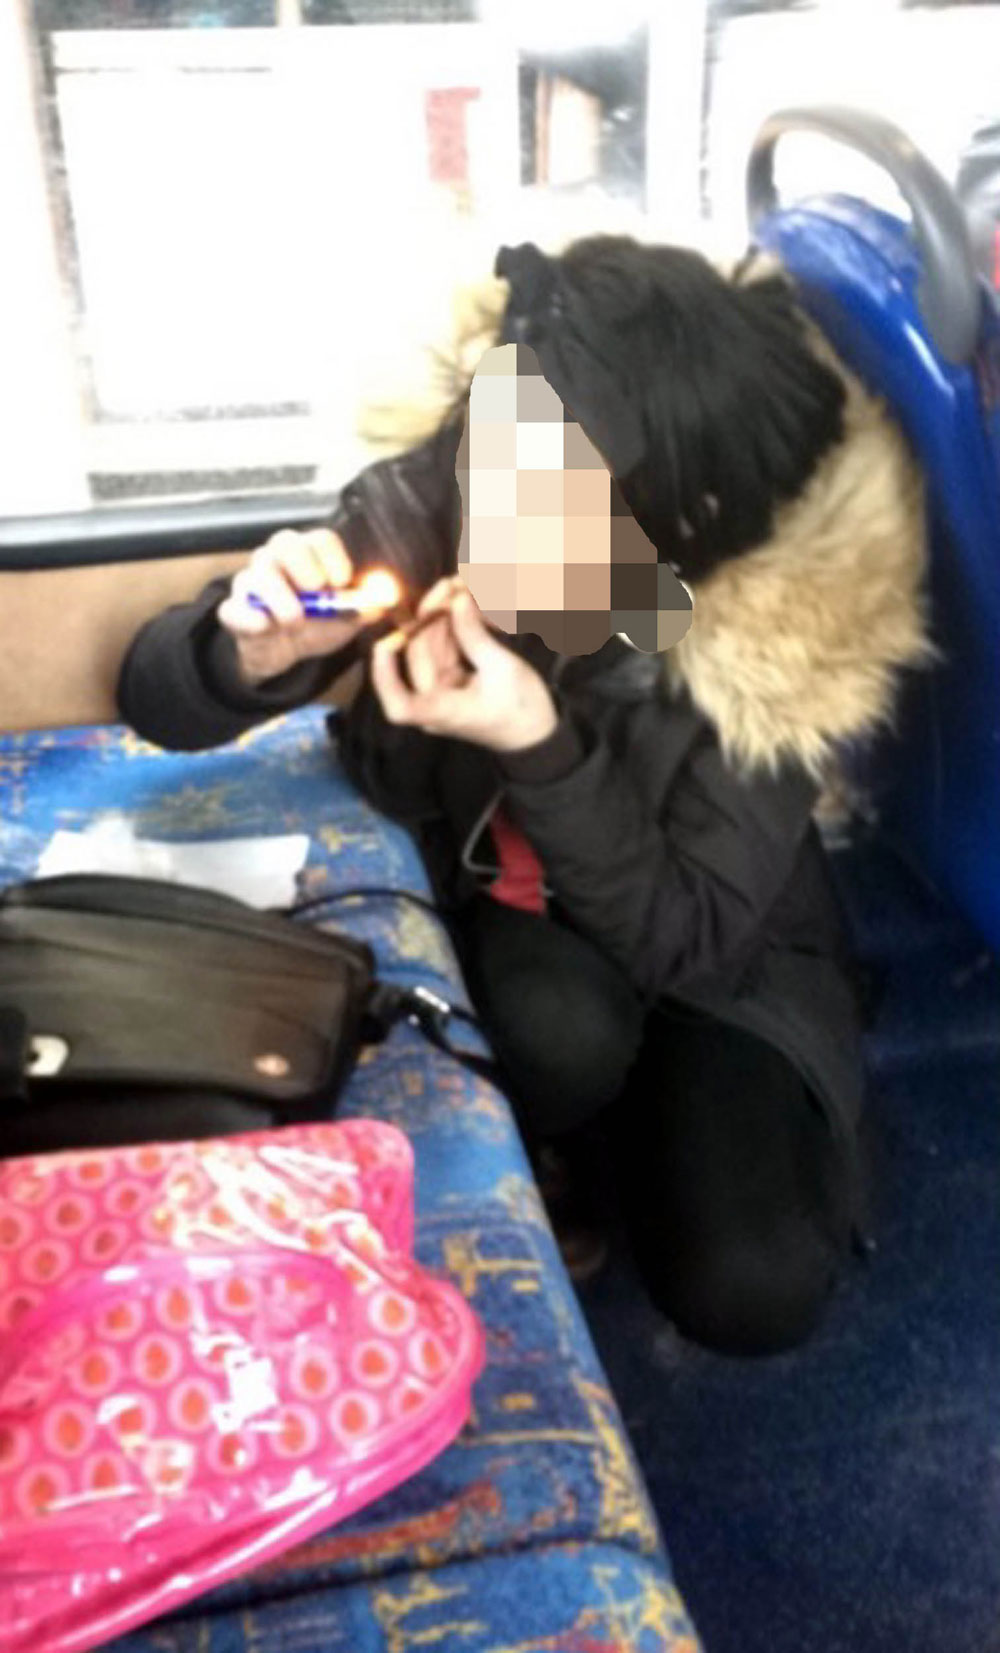 The woman appeared to smoke crack on a bus in broad daylight 